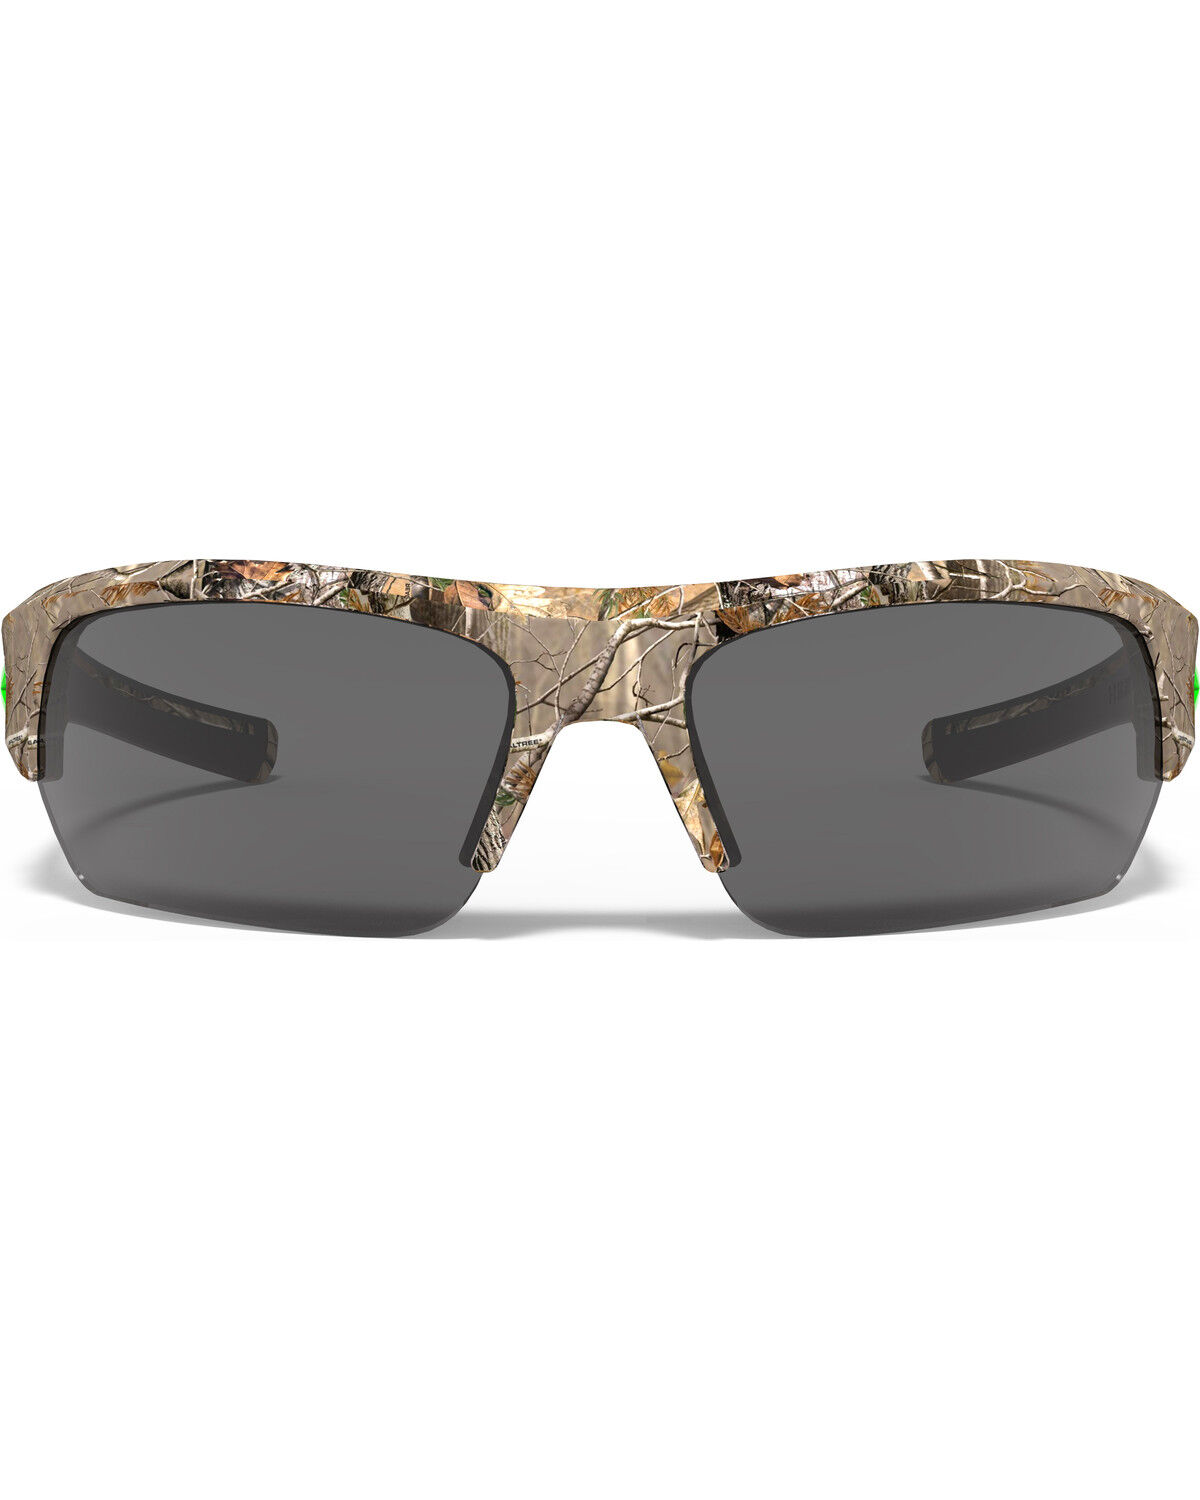 under armour camo glasses Sale,up to 74 